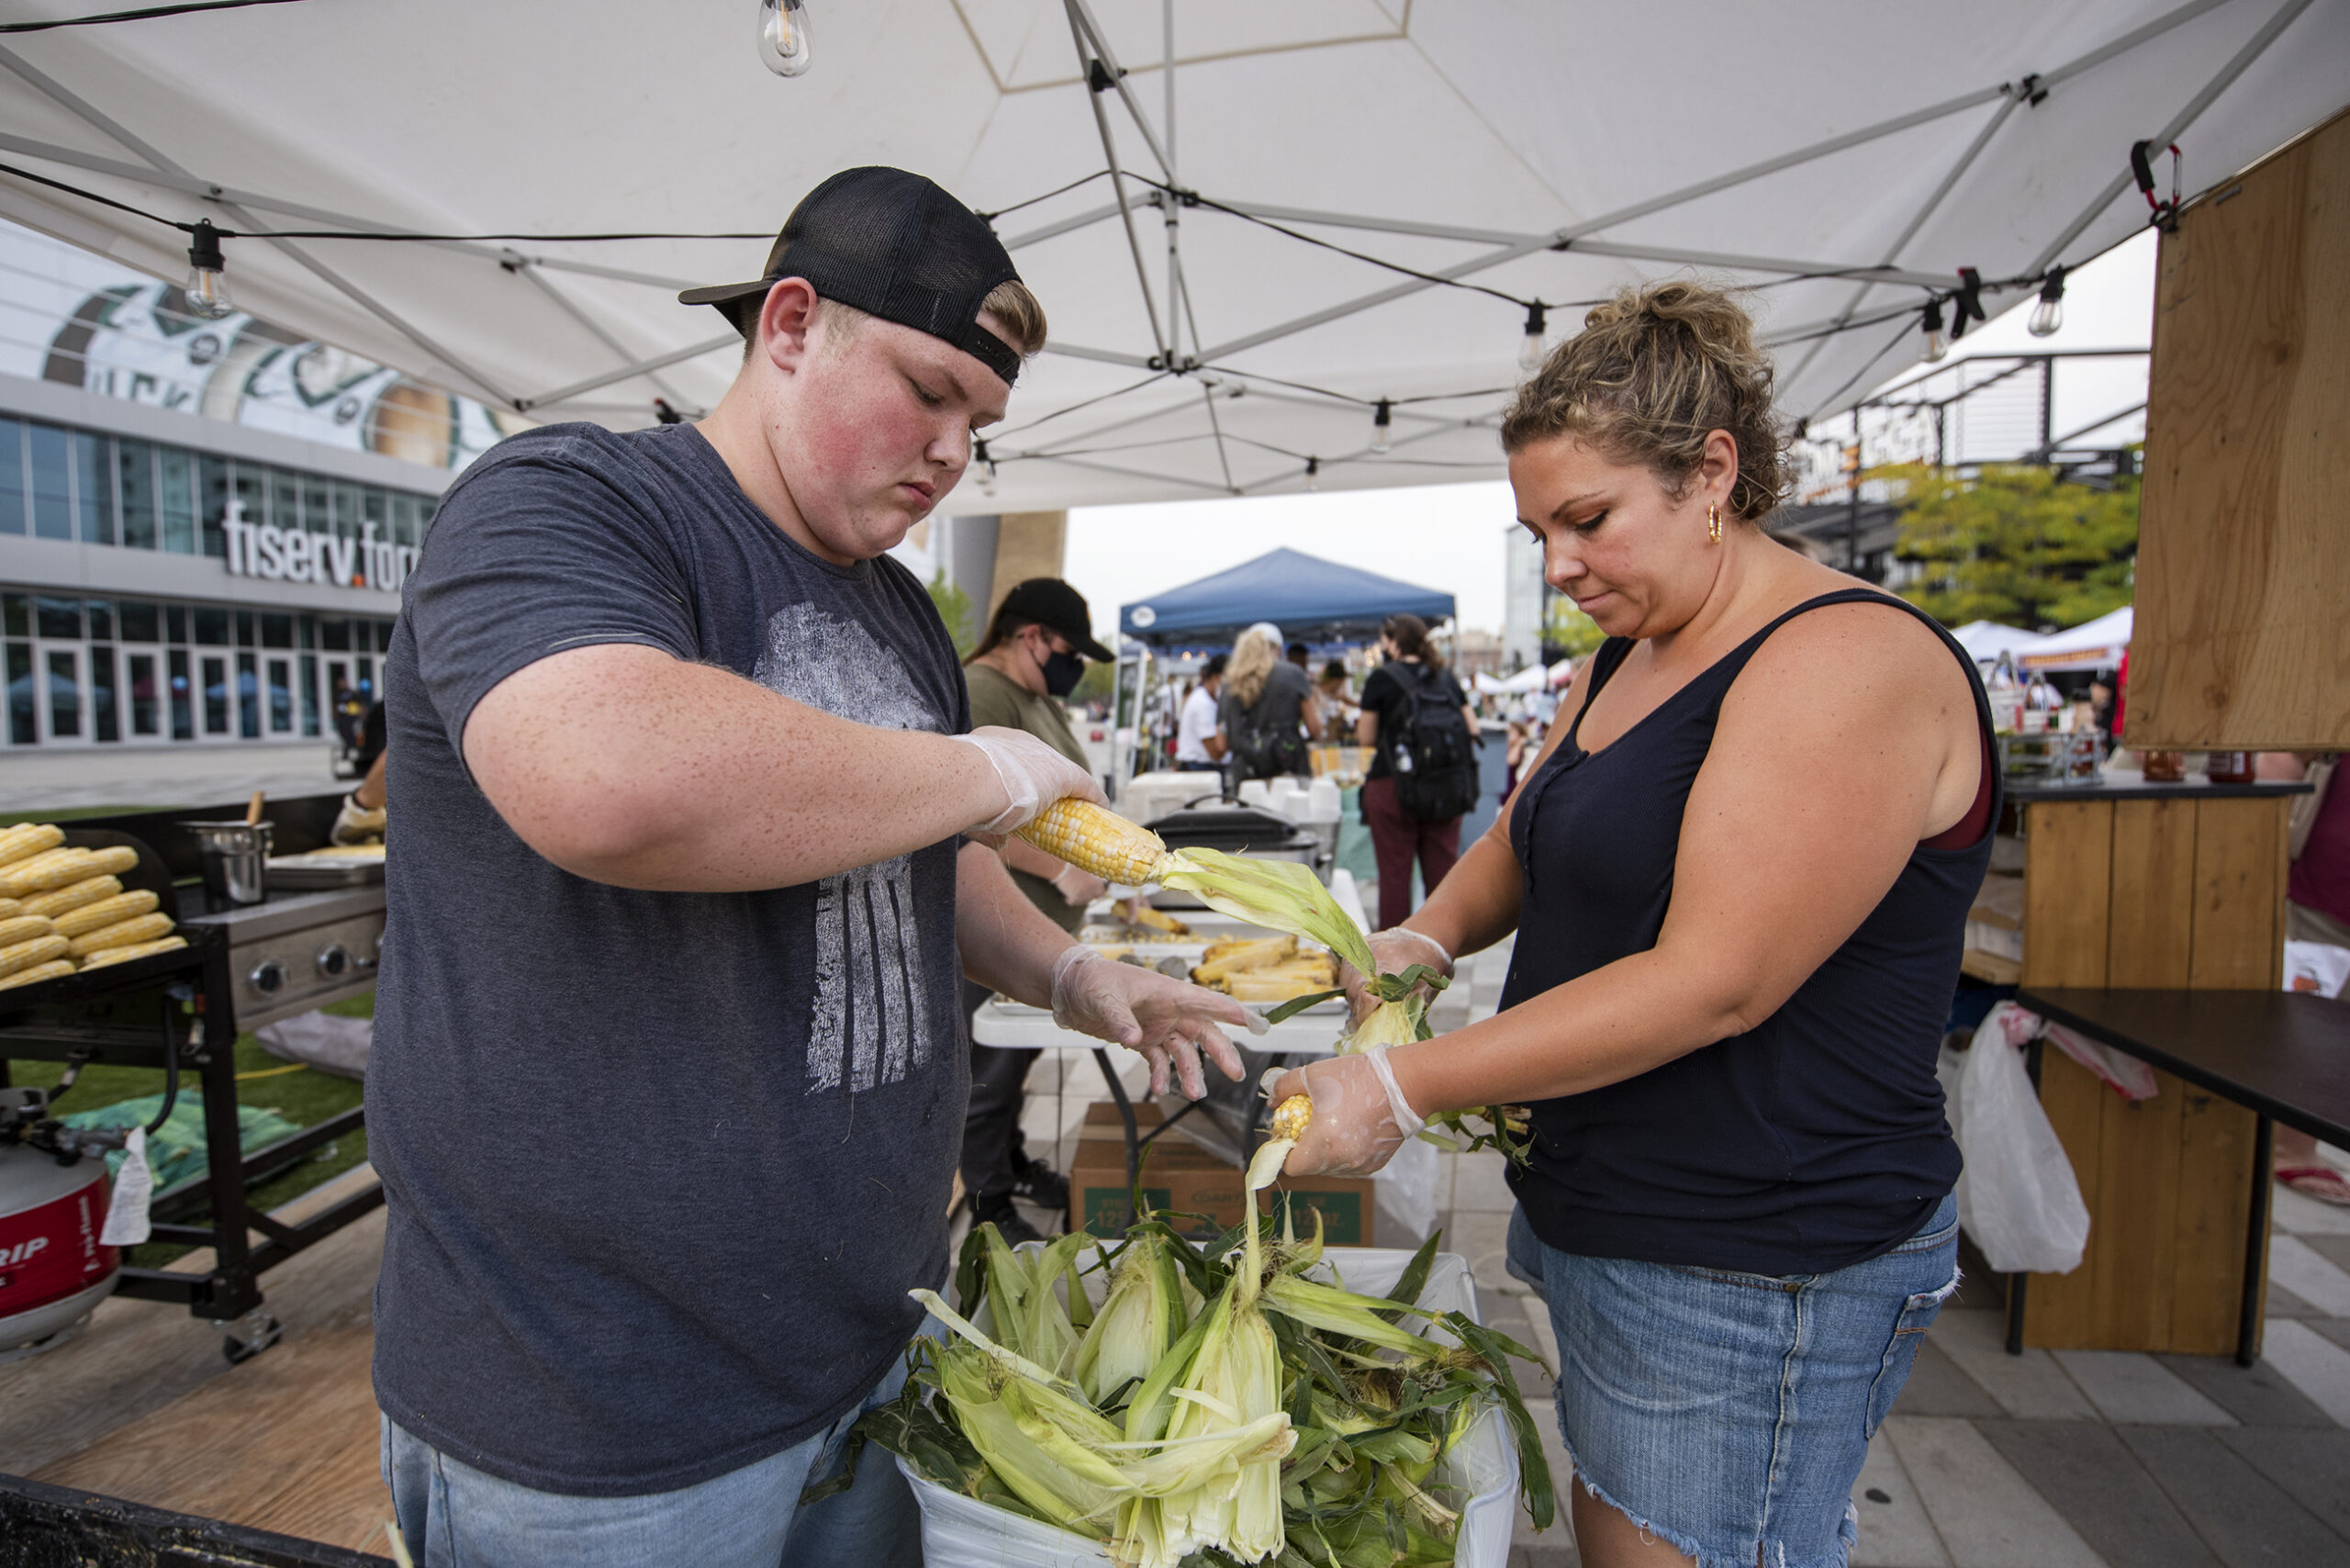 Two people work outdoors at a booth shucking corn.